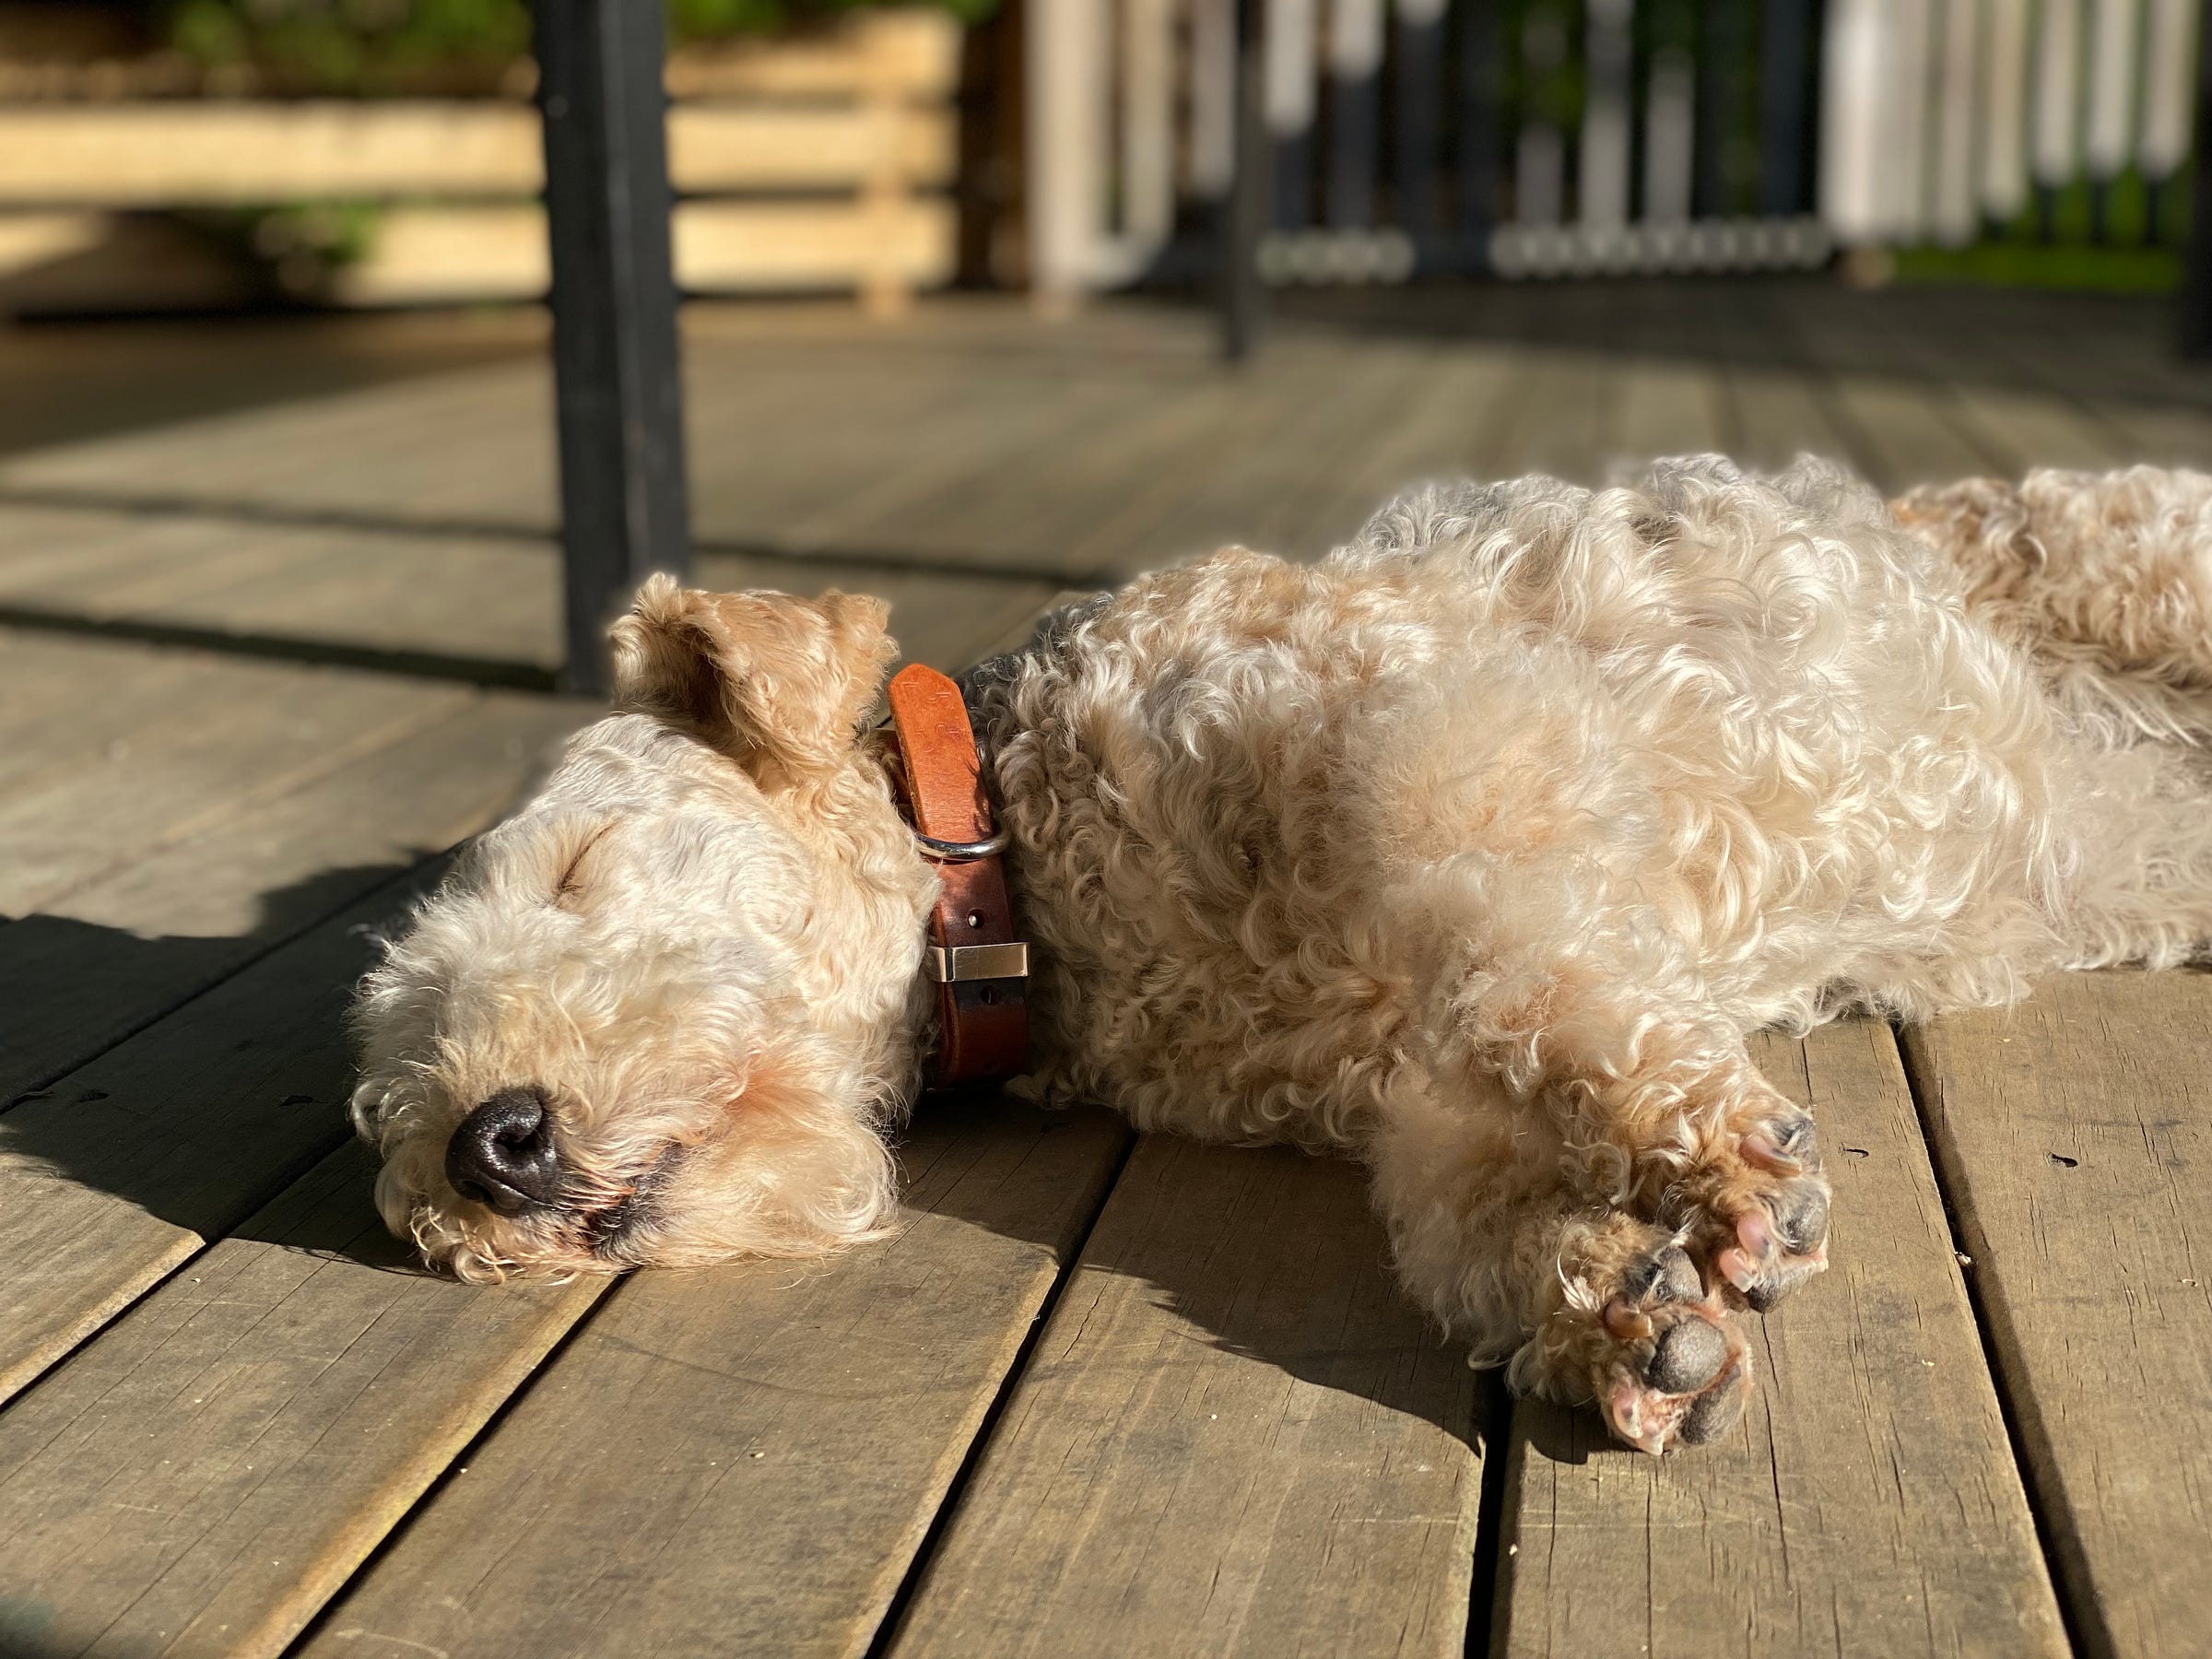 Nutmeg the lakeland terrier asleep on an outside deck, in the sun. She is stretching her paws out towards the camera, and her face is relaxed in sleep.